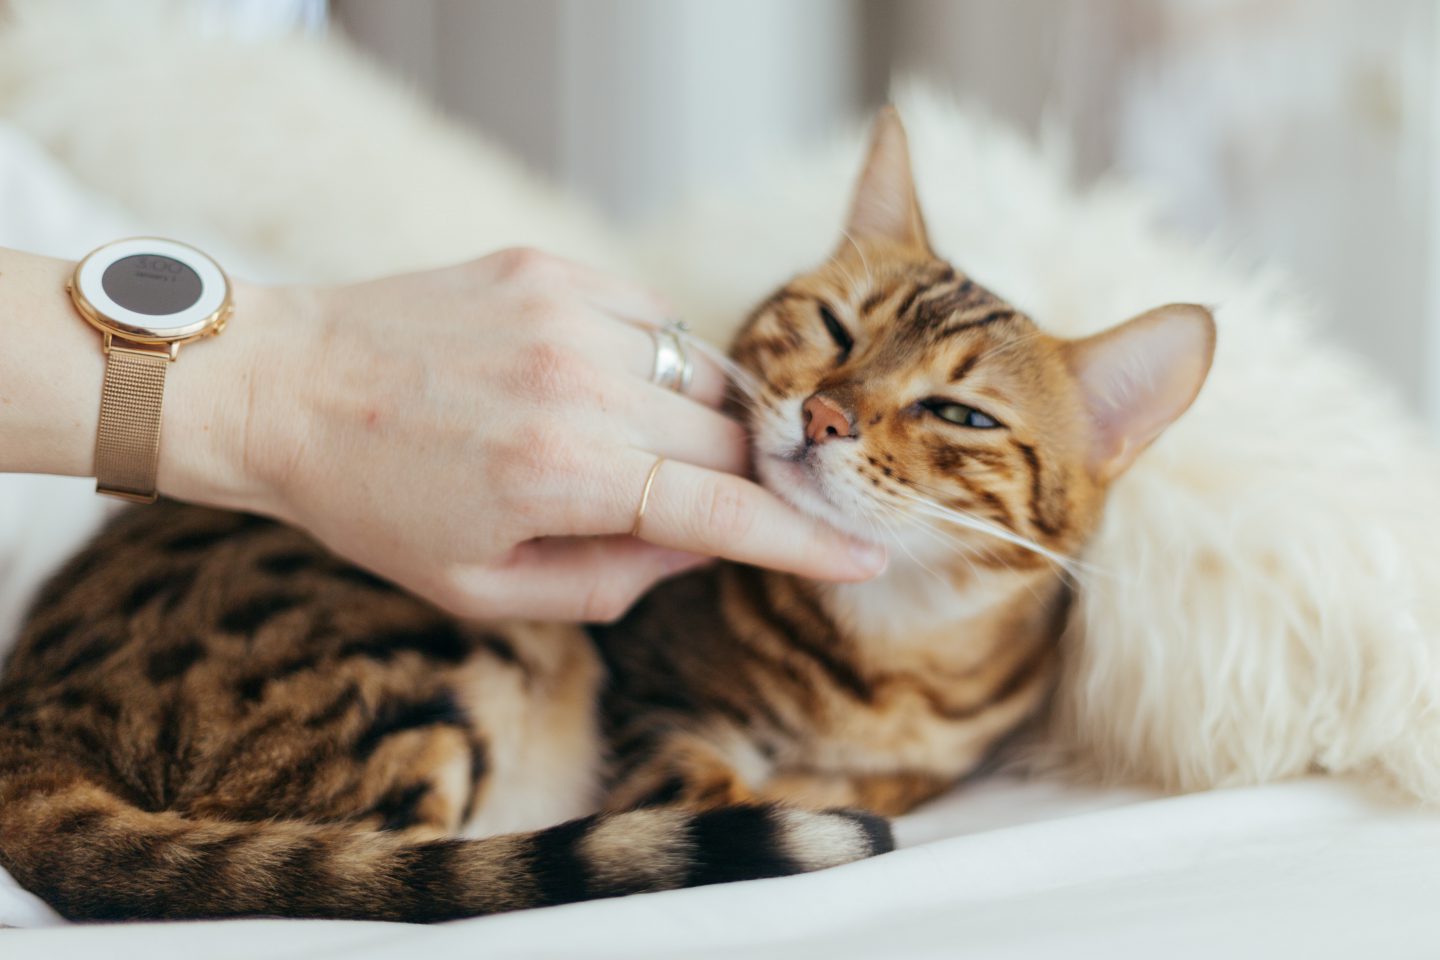 Cat lovers rejoice: watching online videos lowers stress and makes you happy